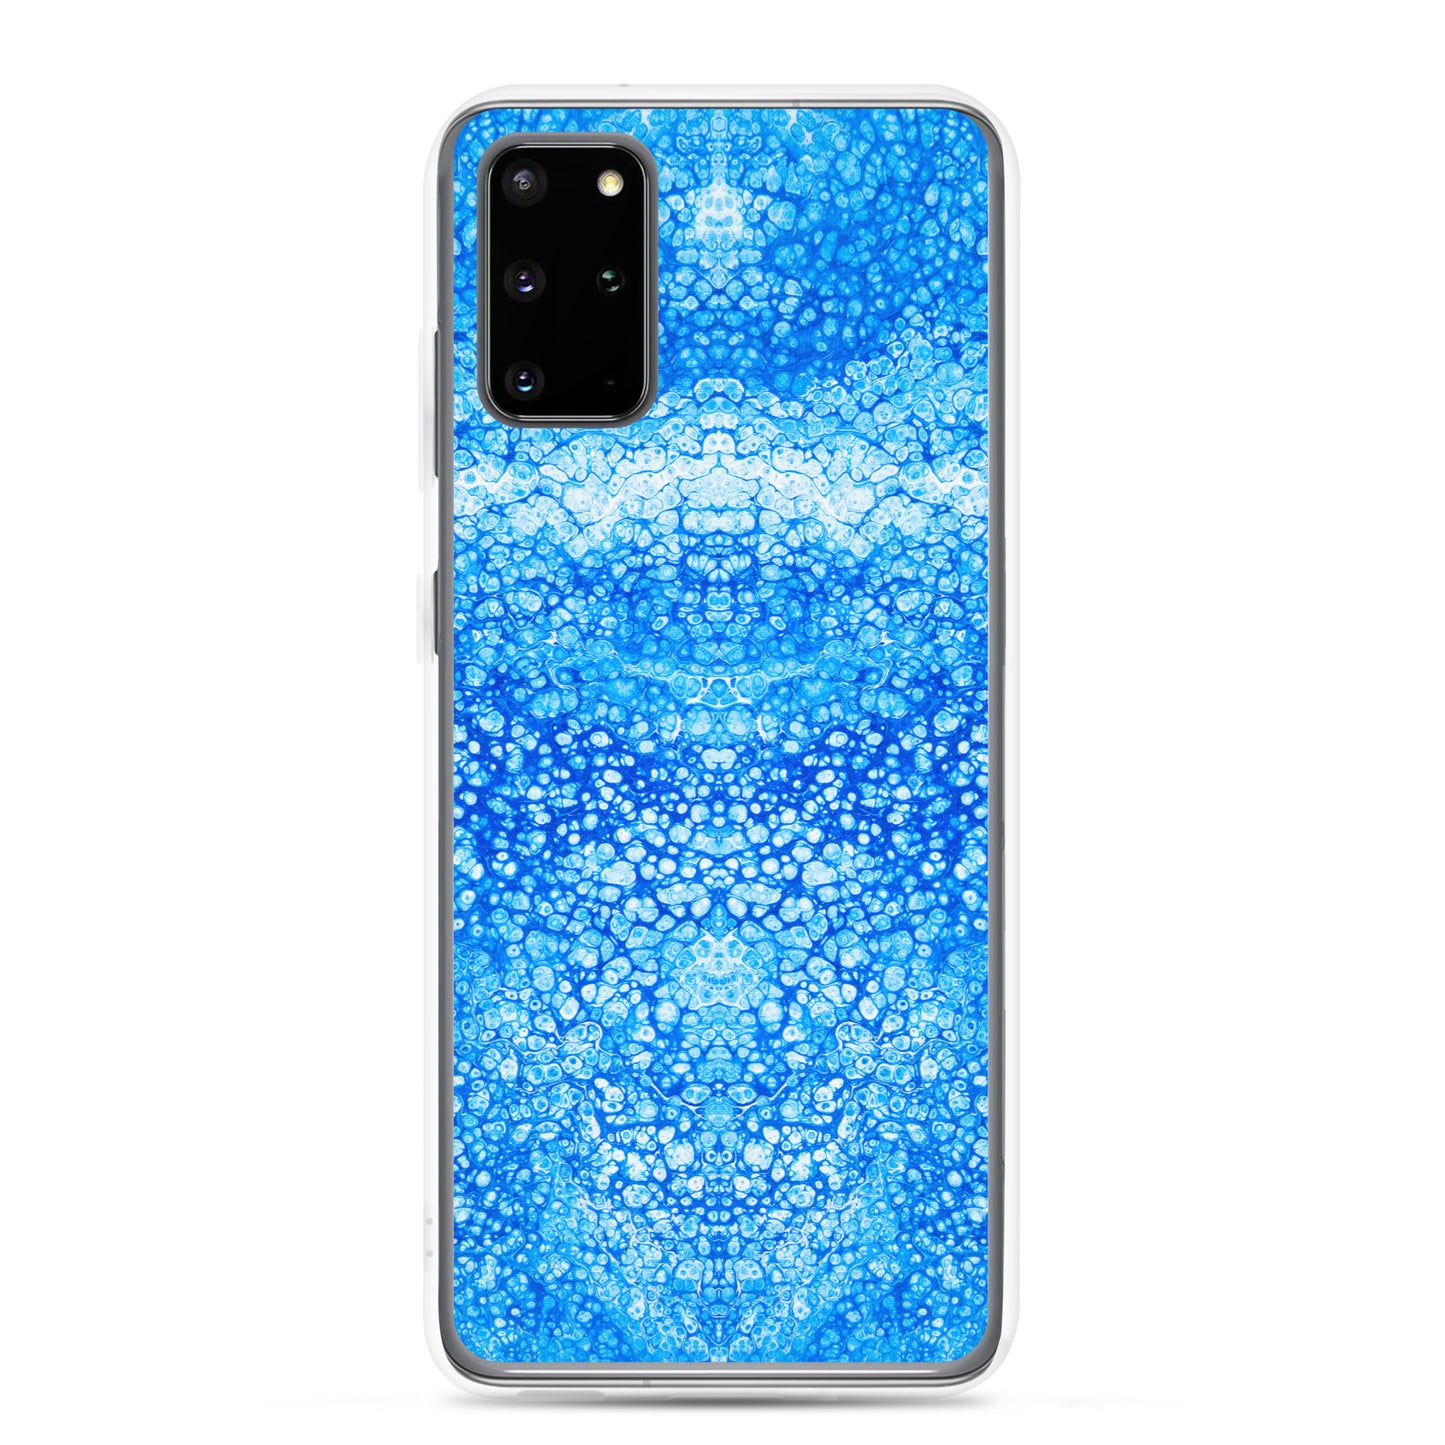 NightOwl Studio Custom Phone Case Compatible with Samsung Galaxy, Slim Cover for Wireless Charging, Drop and Scratch Resistant, Cryptic Blue